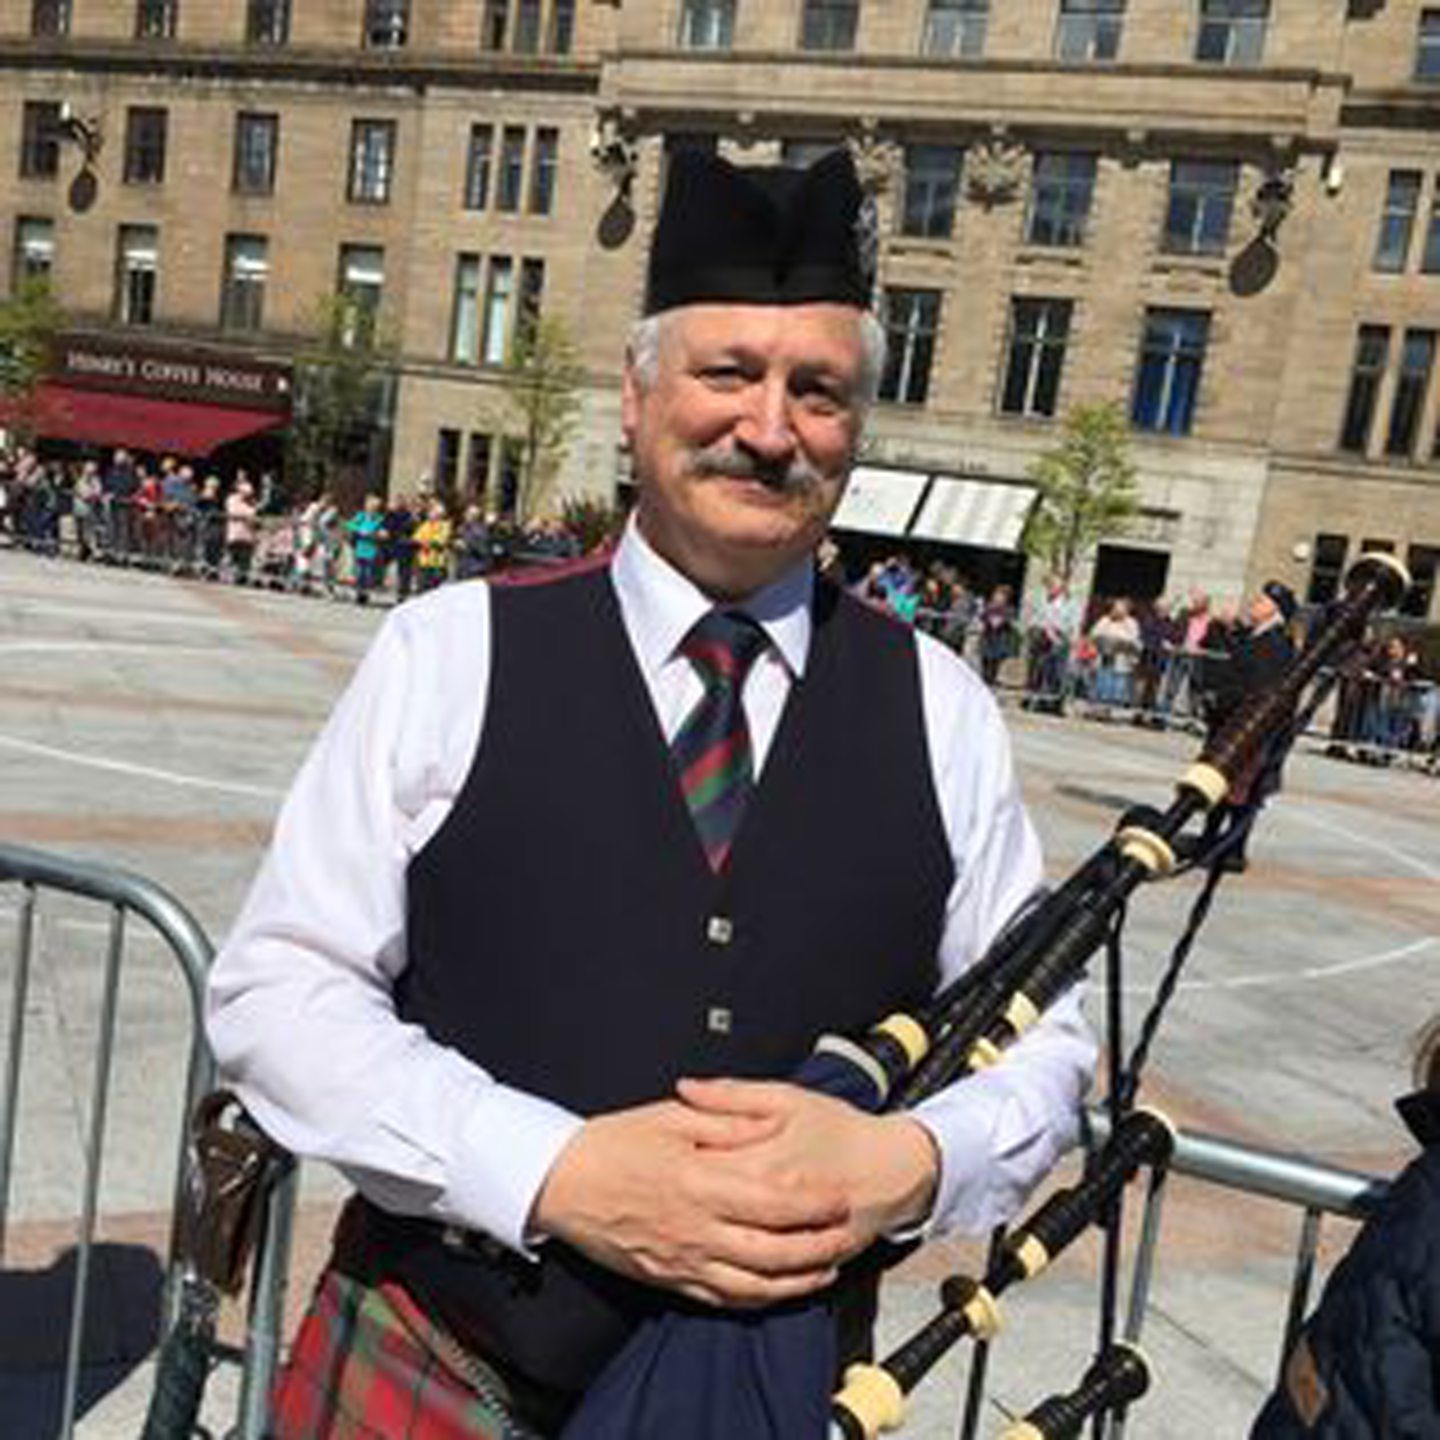 Tom with his bagpipes in Dundee.